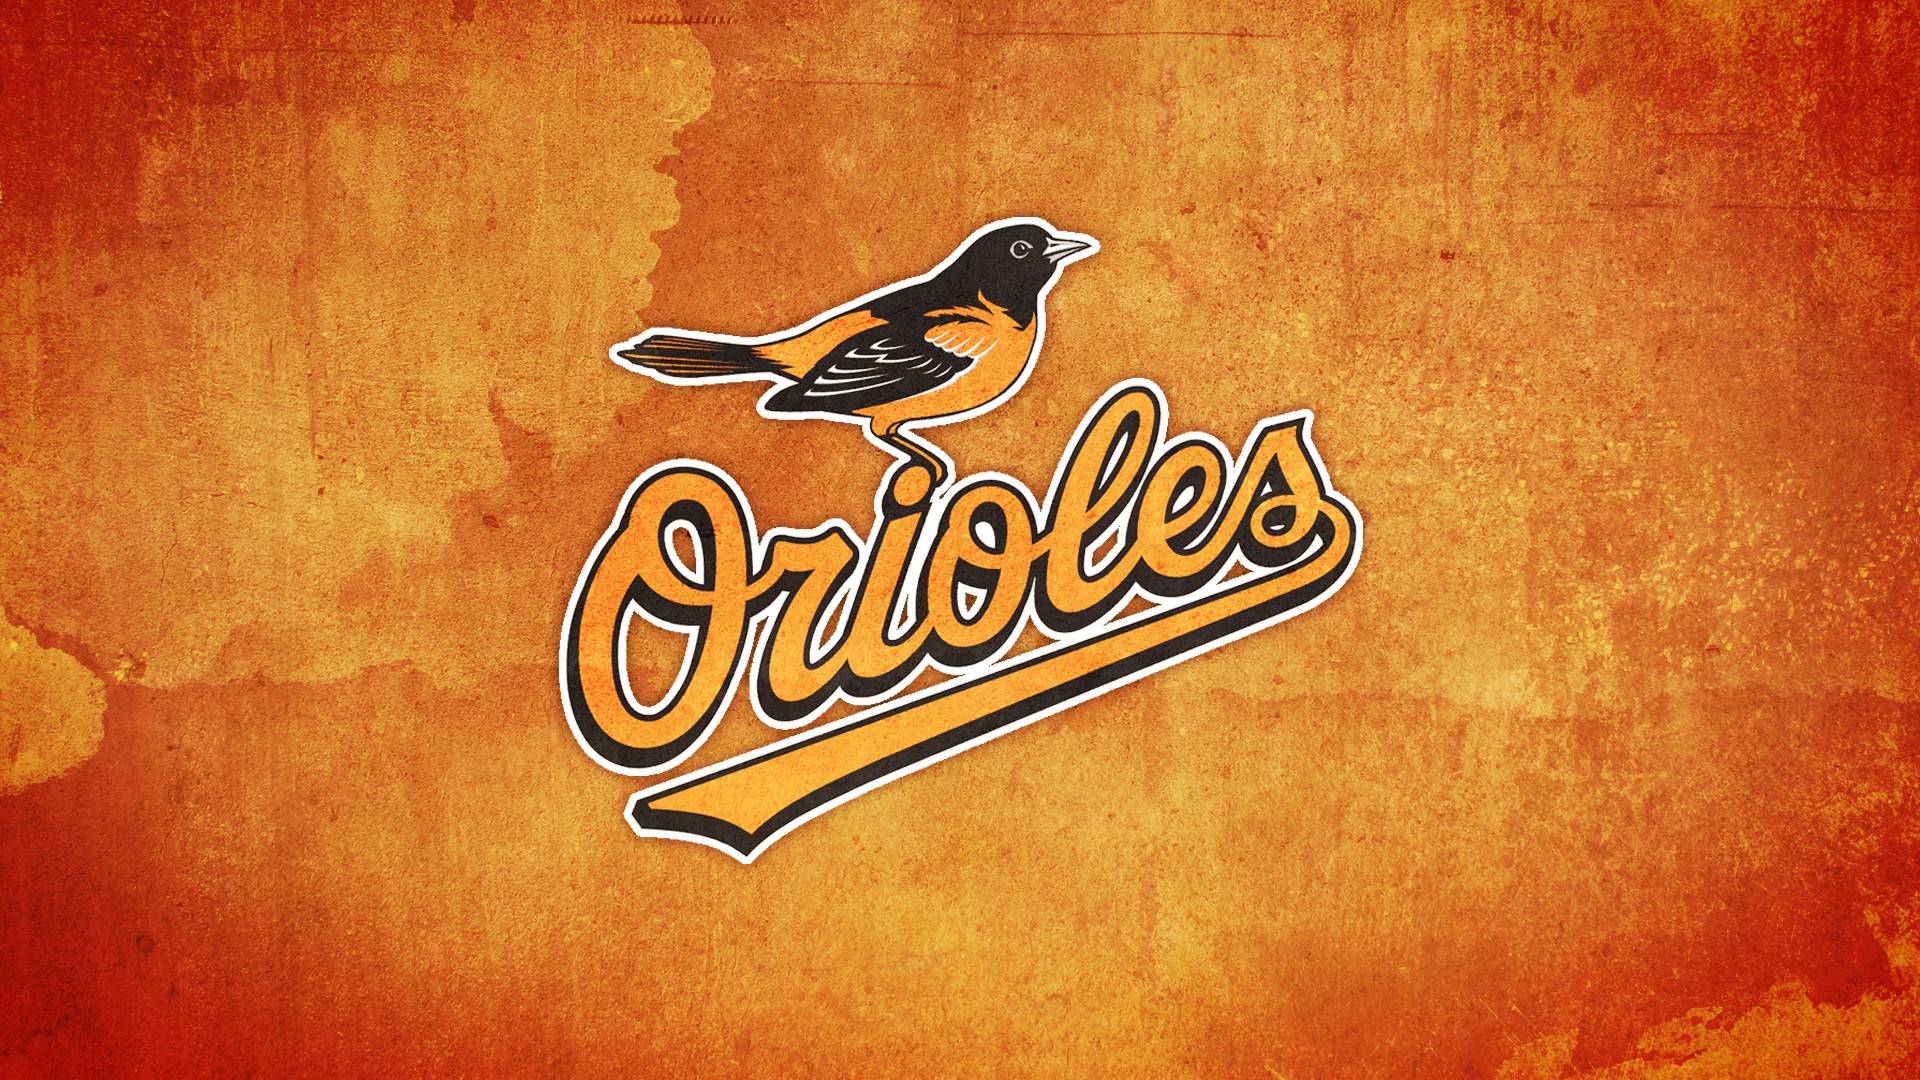 Wallpaper Desktop Baltimore Orioles HD with high-resolution 1920x1080 pixel. You can use this wallpaper for Mac Desktop Wallpaper, Laptop Screensavers, Android Wallpapers, Tablet or iPhone Home Screen and another mobile phone device